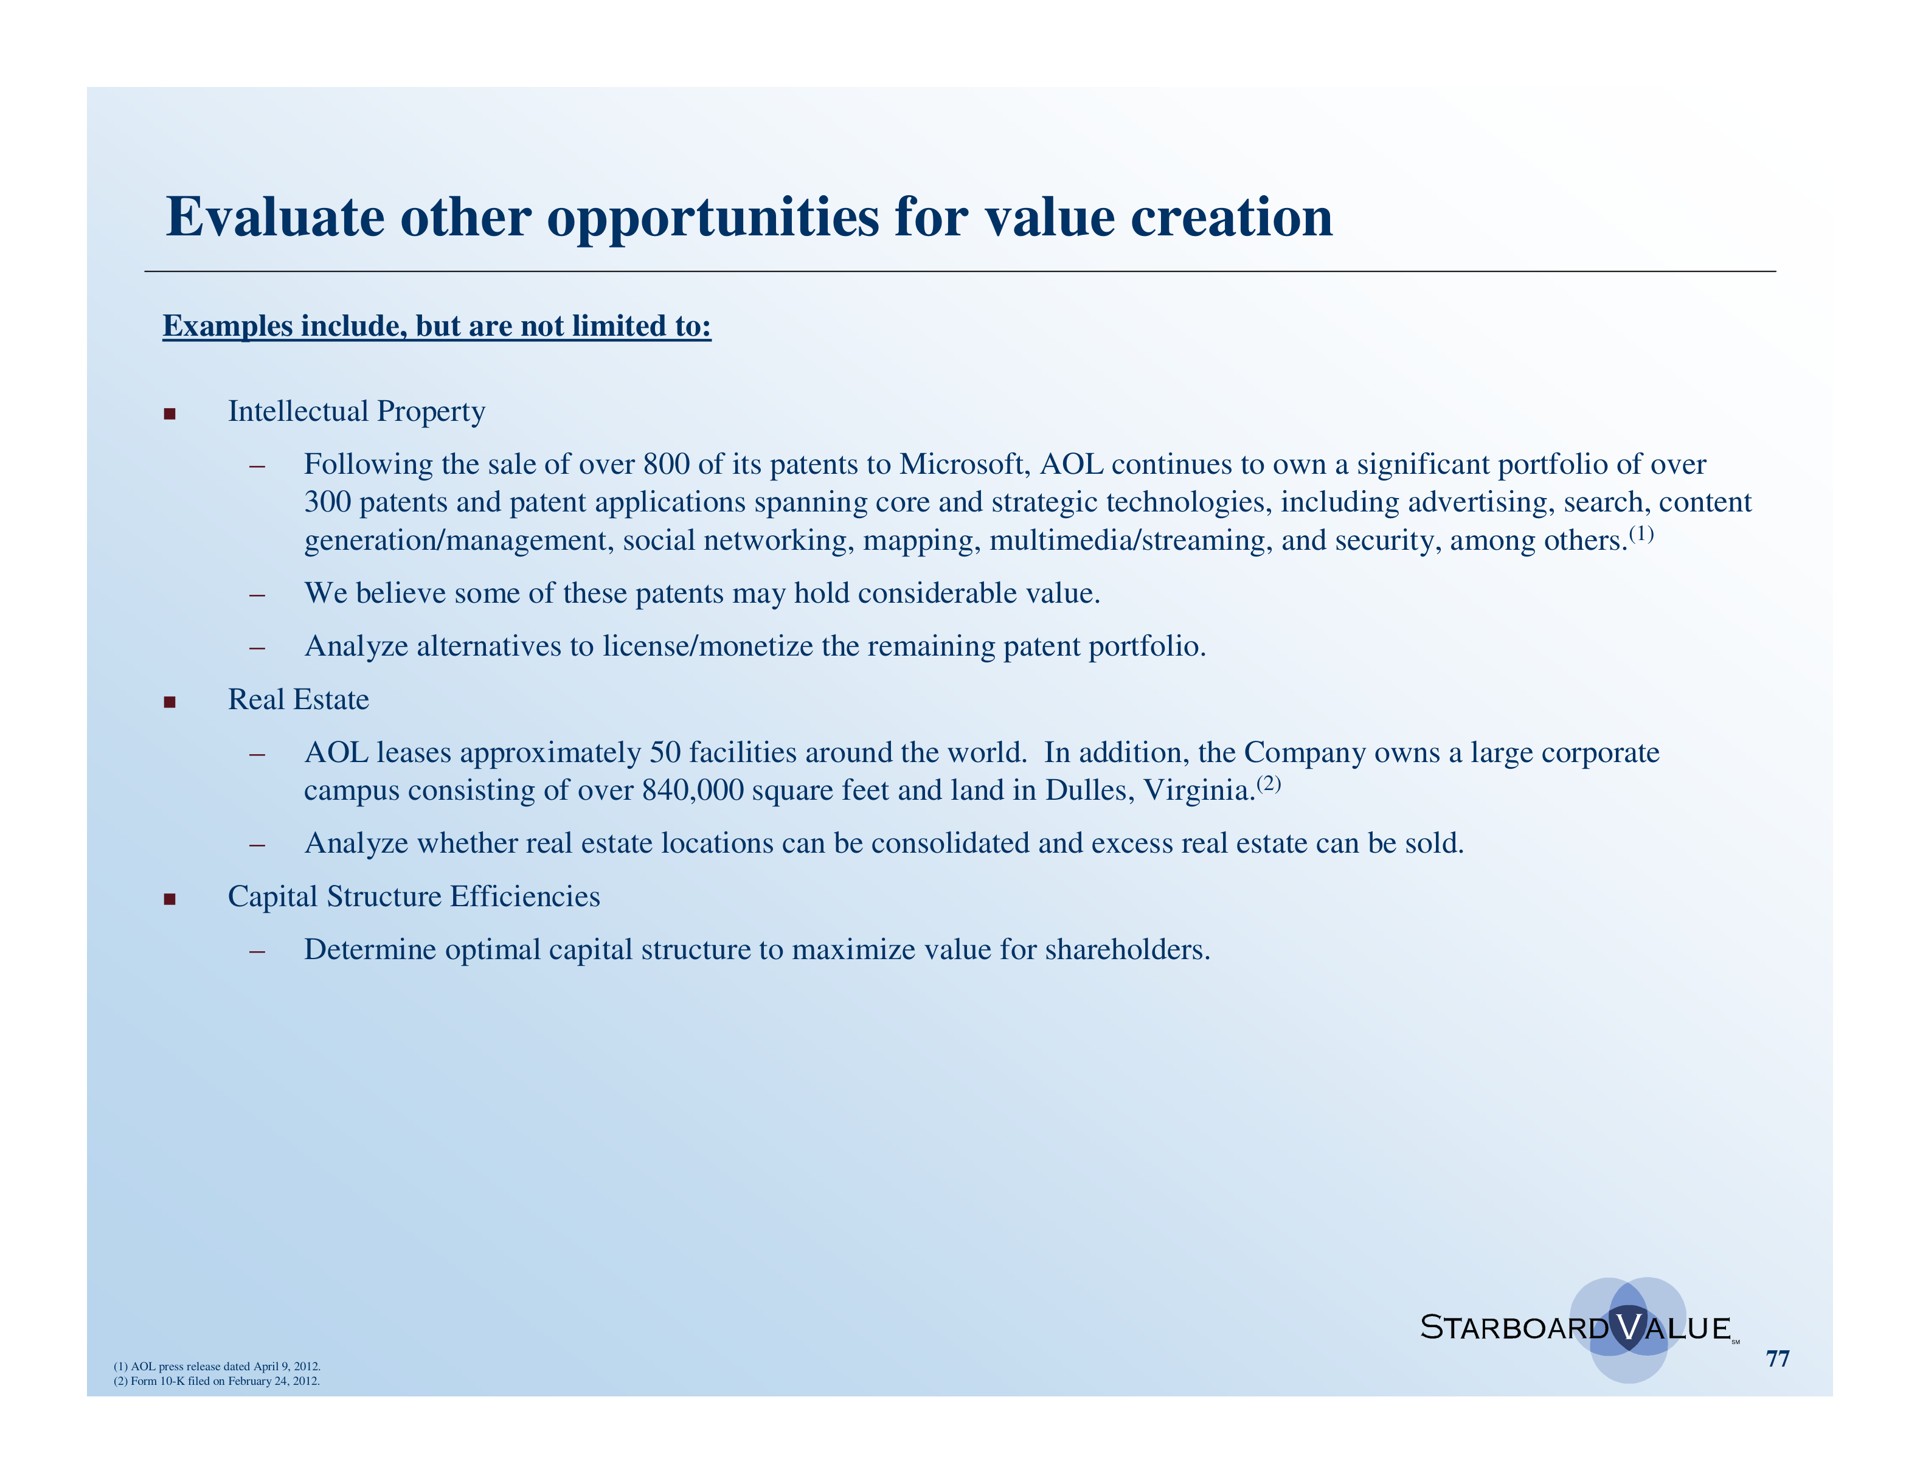 evaluate other opportunities for value creation | Starboard Value